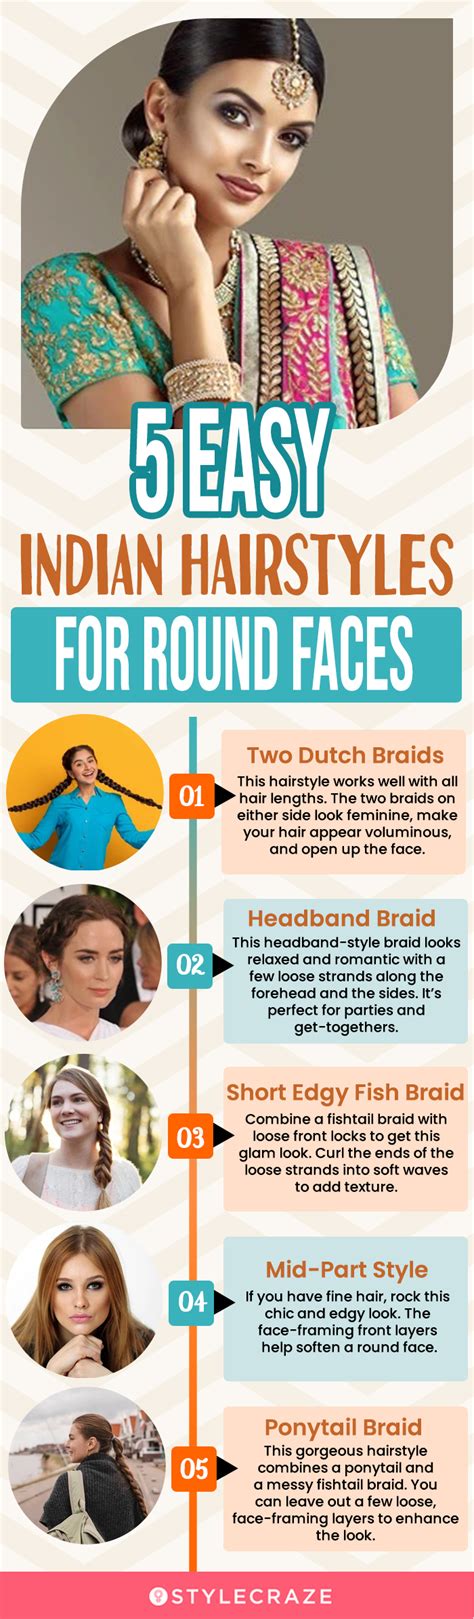 52 indian hairstyles for round faces